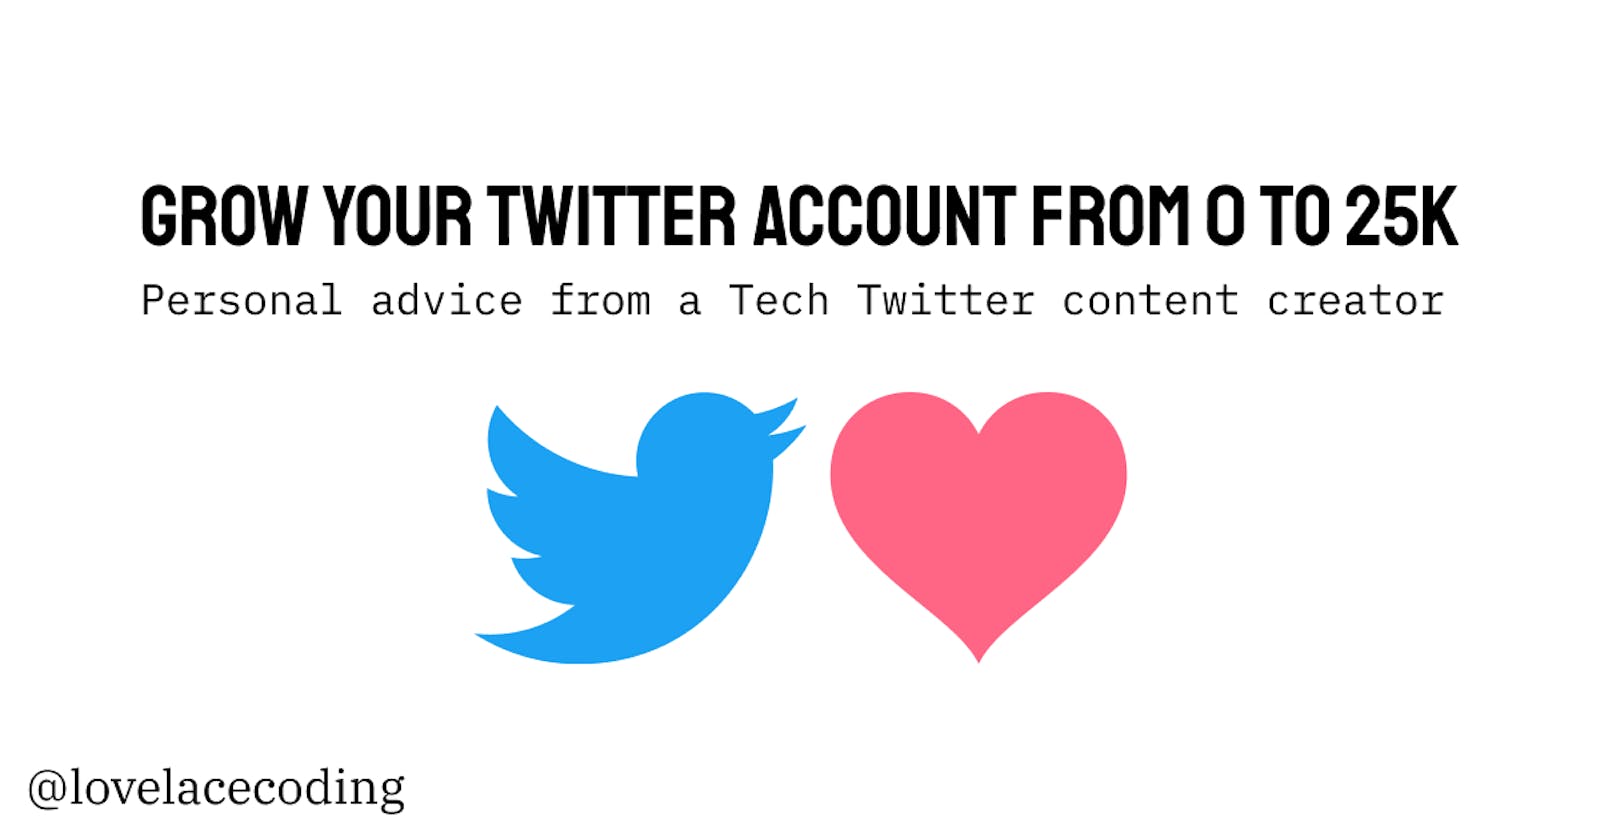 Grow Your Twitter Account From 0 to 25k